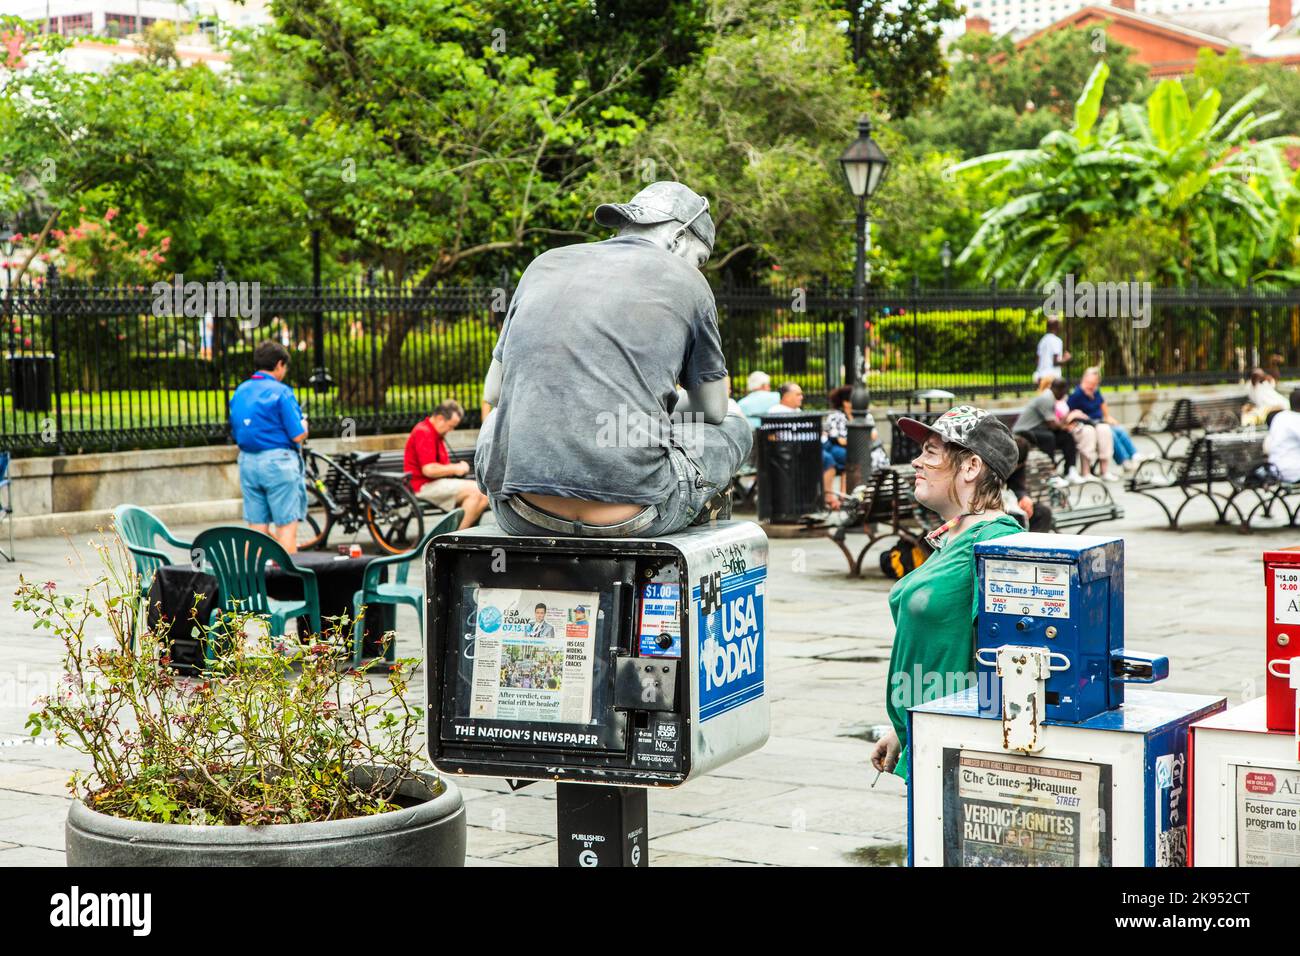 NEW ORLEANS, USA - JULY 15:  people work as pantomime to earn money from tourists at Jackson Square on July 15, 2013 in New Orleans. Jackson Square, i Stock Photo